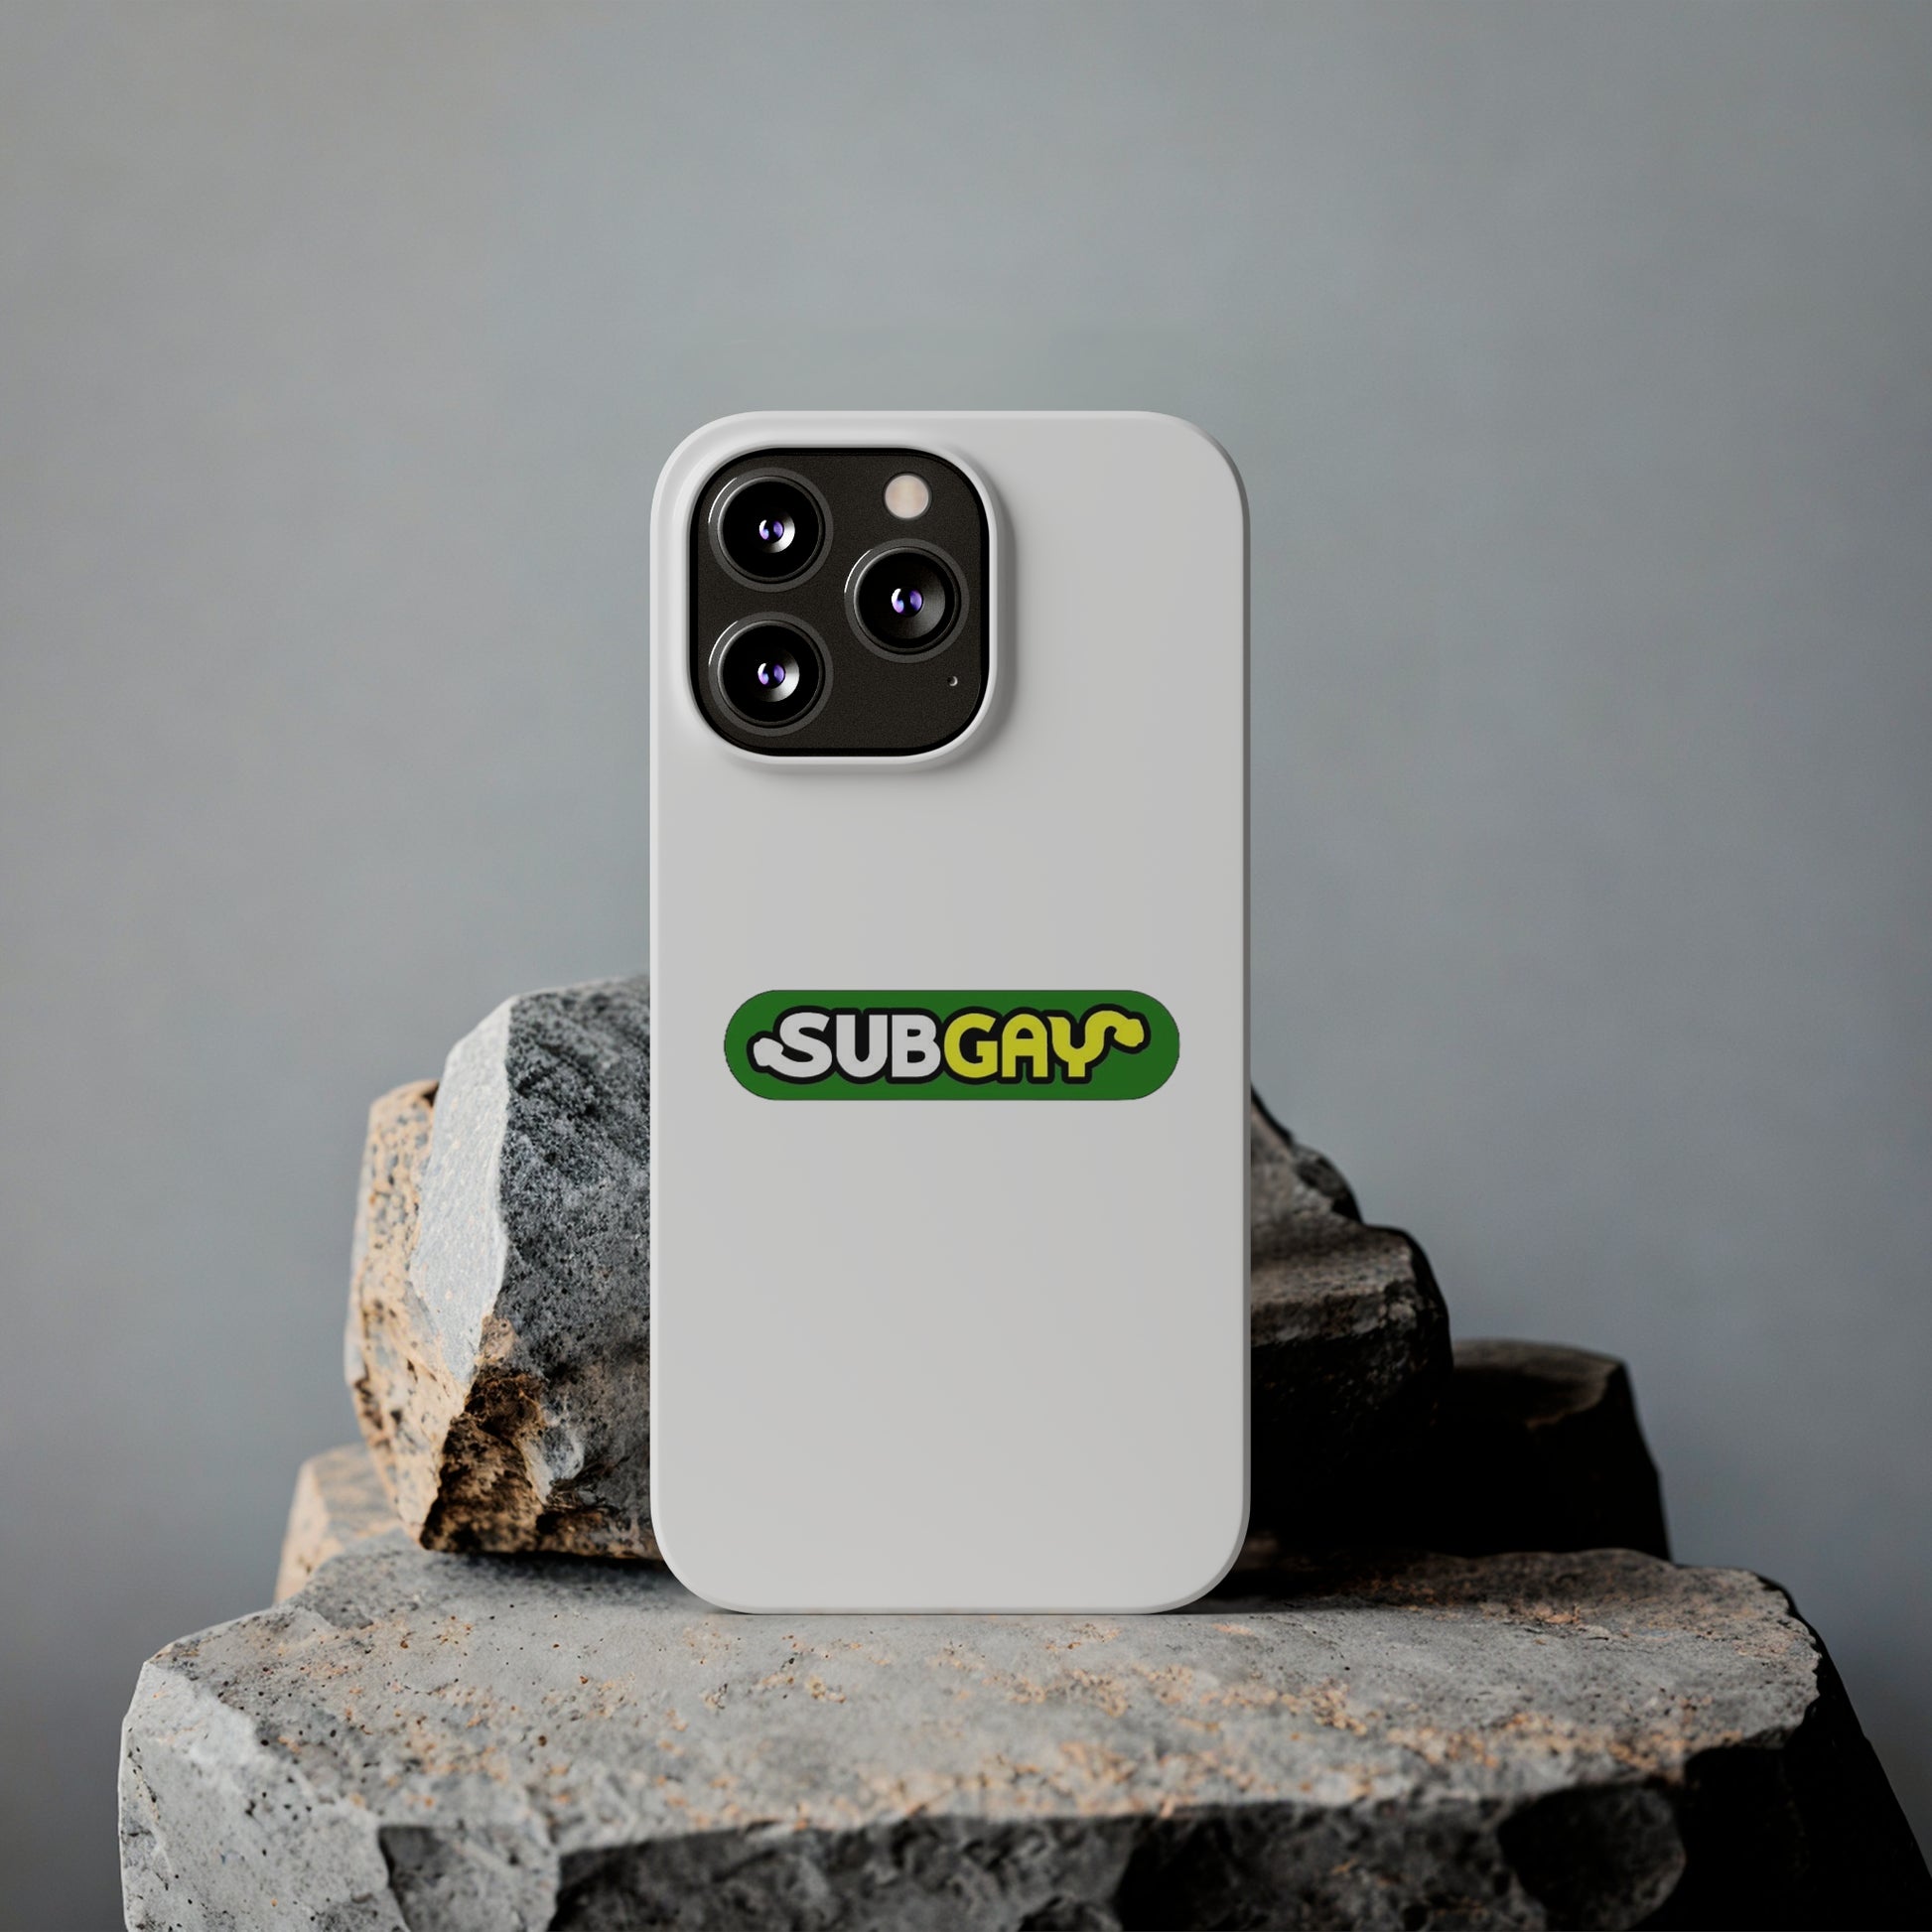 "SubGay" MagStrong Phone Cases